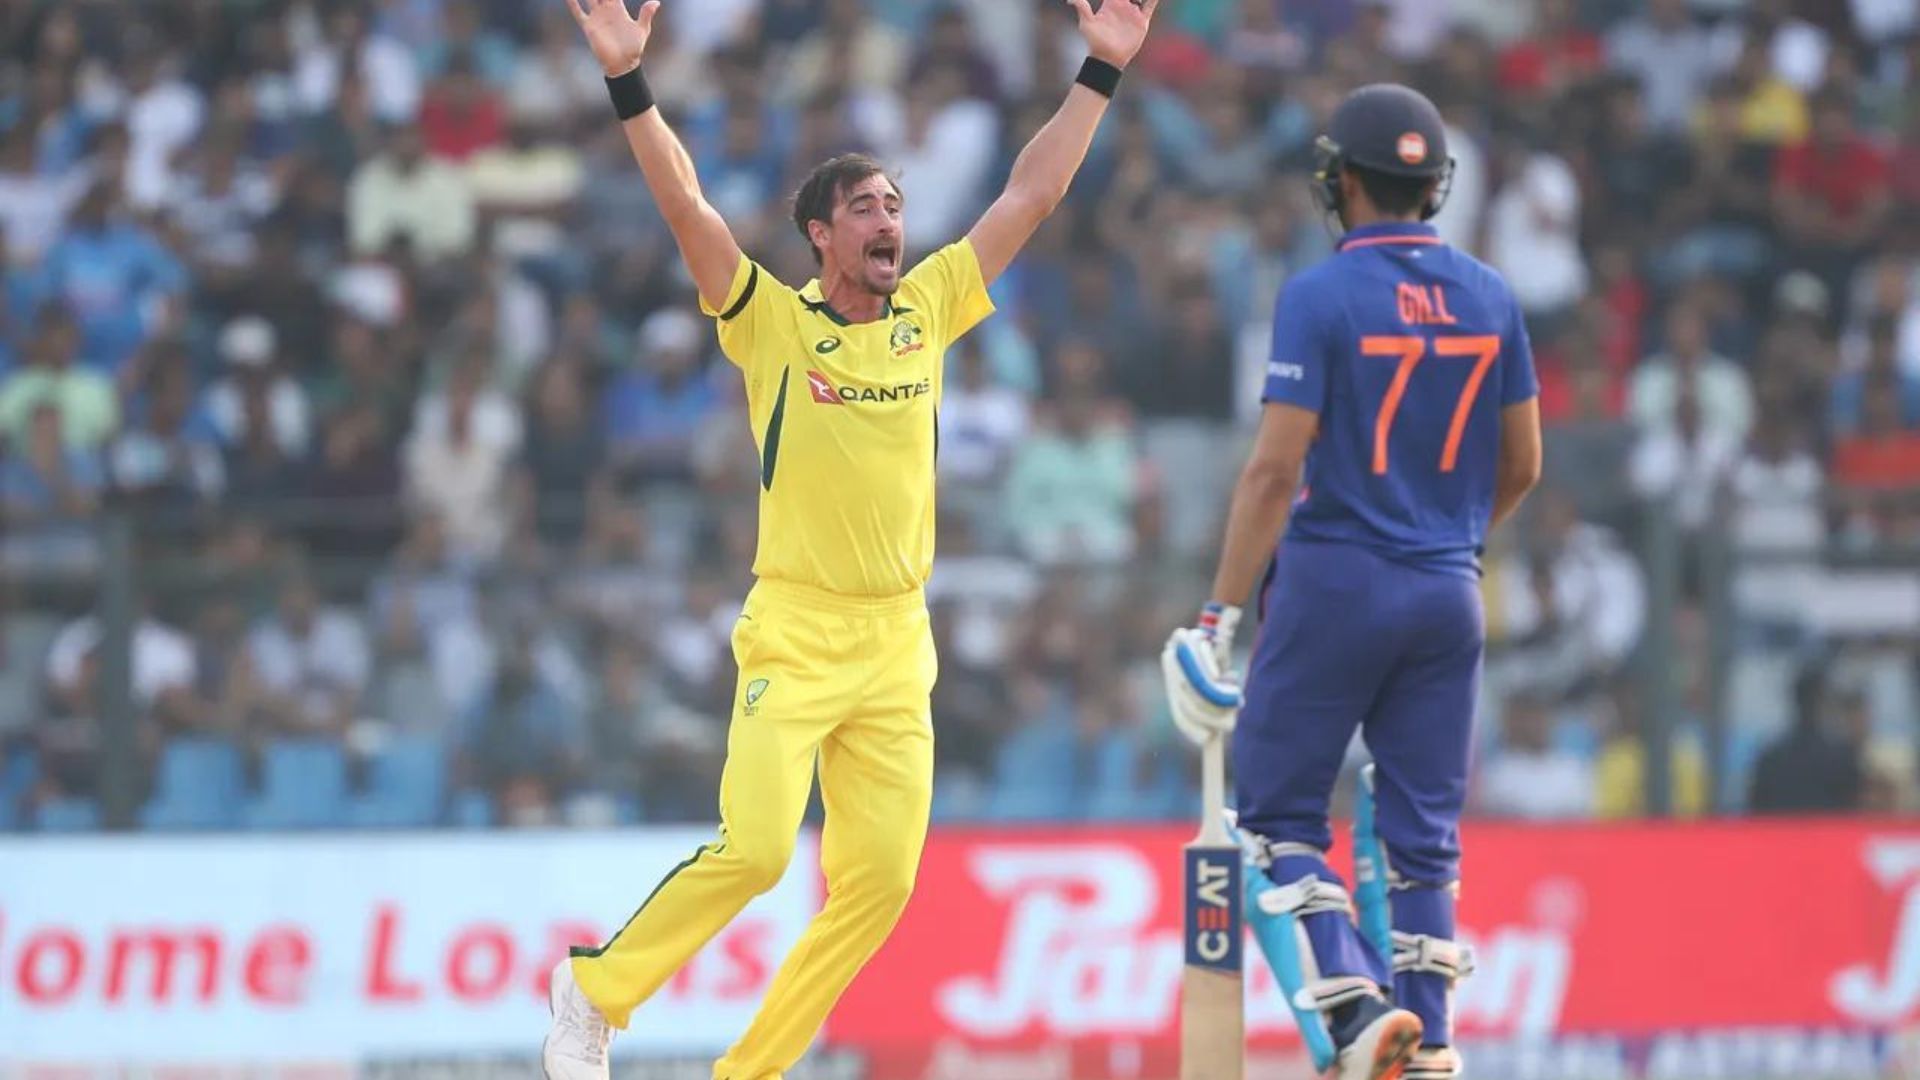 Mitchell Starc has caused India a lot of headaches already in thisn series (P.c.:BCCI)